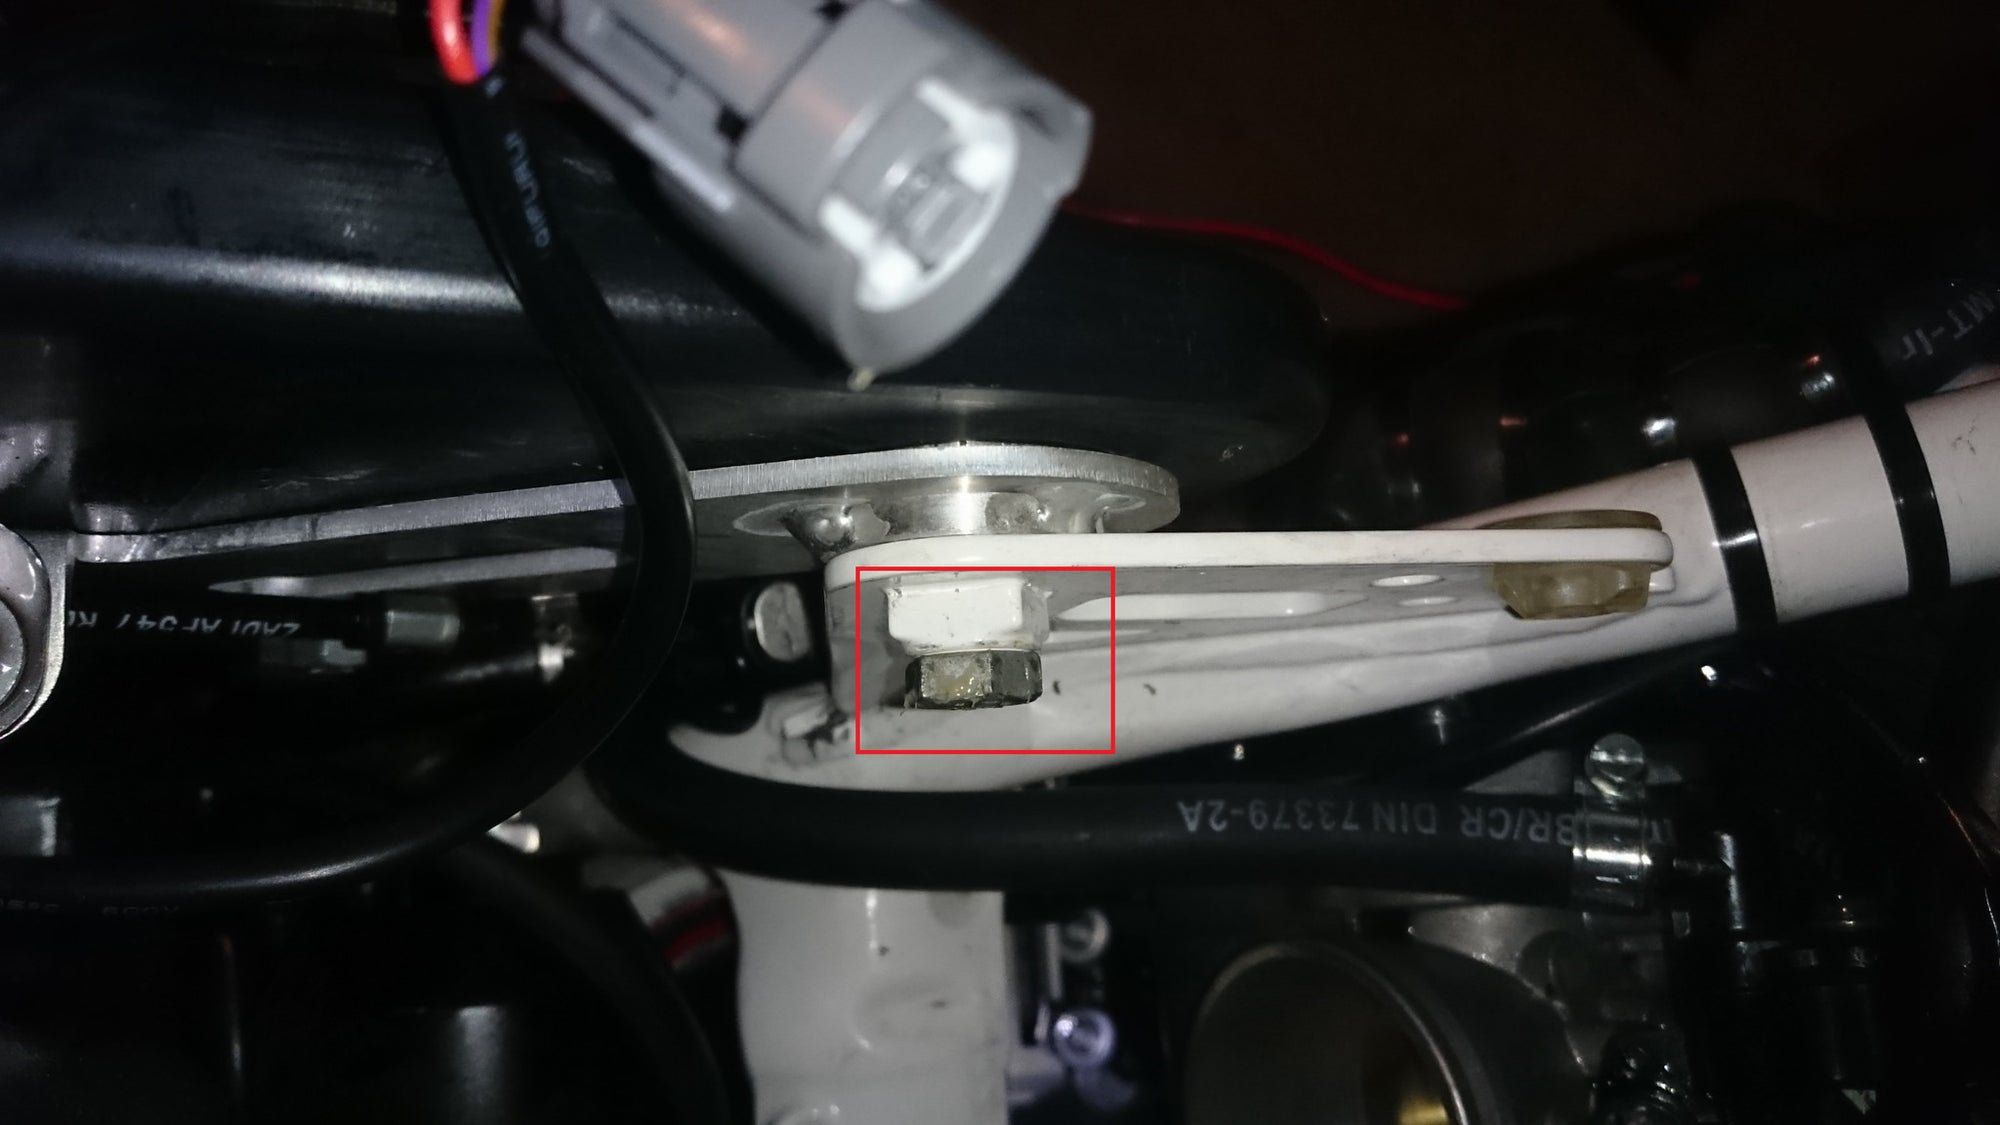 Husqvarna 701 and Perun moto Subframe reinforcing kit issue - 2nd UPDATE